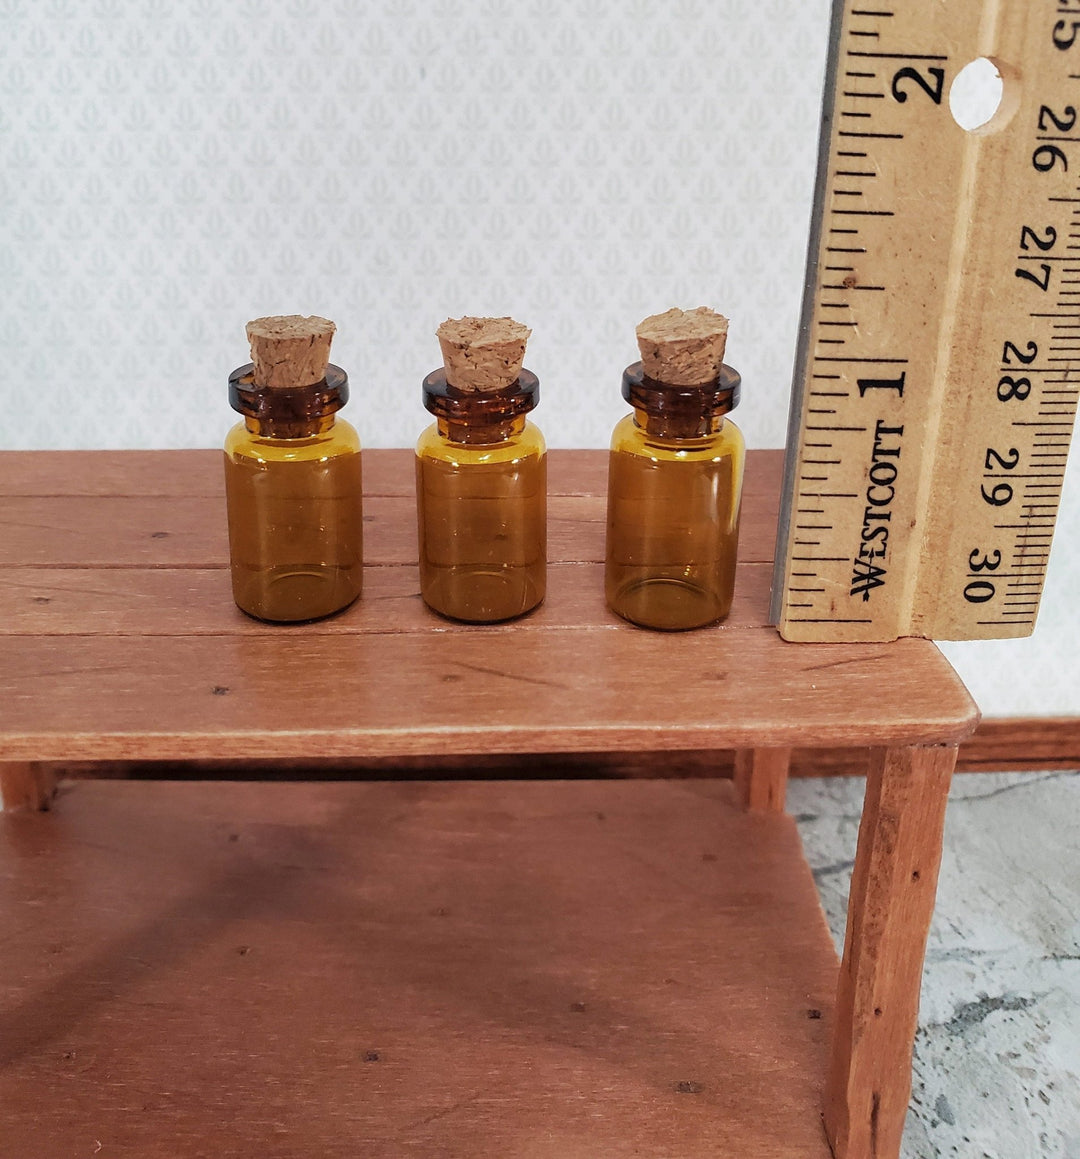 Miniature Amber Glass Jars Bottles Cork Stoppers x3 Apothecary Potions 1 1/8" Tall - Miniature Crush